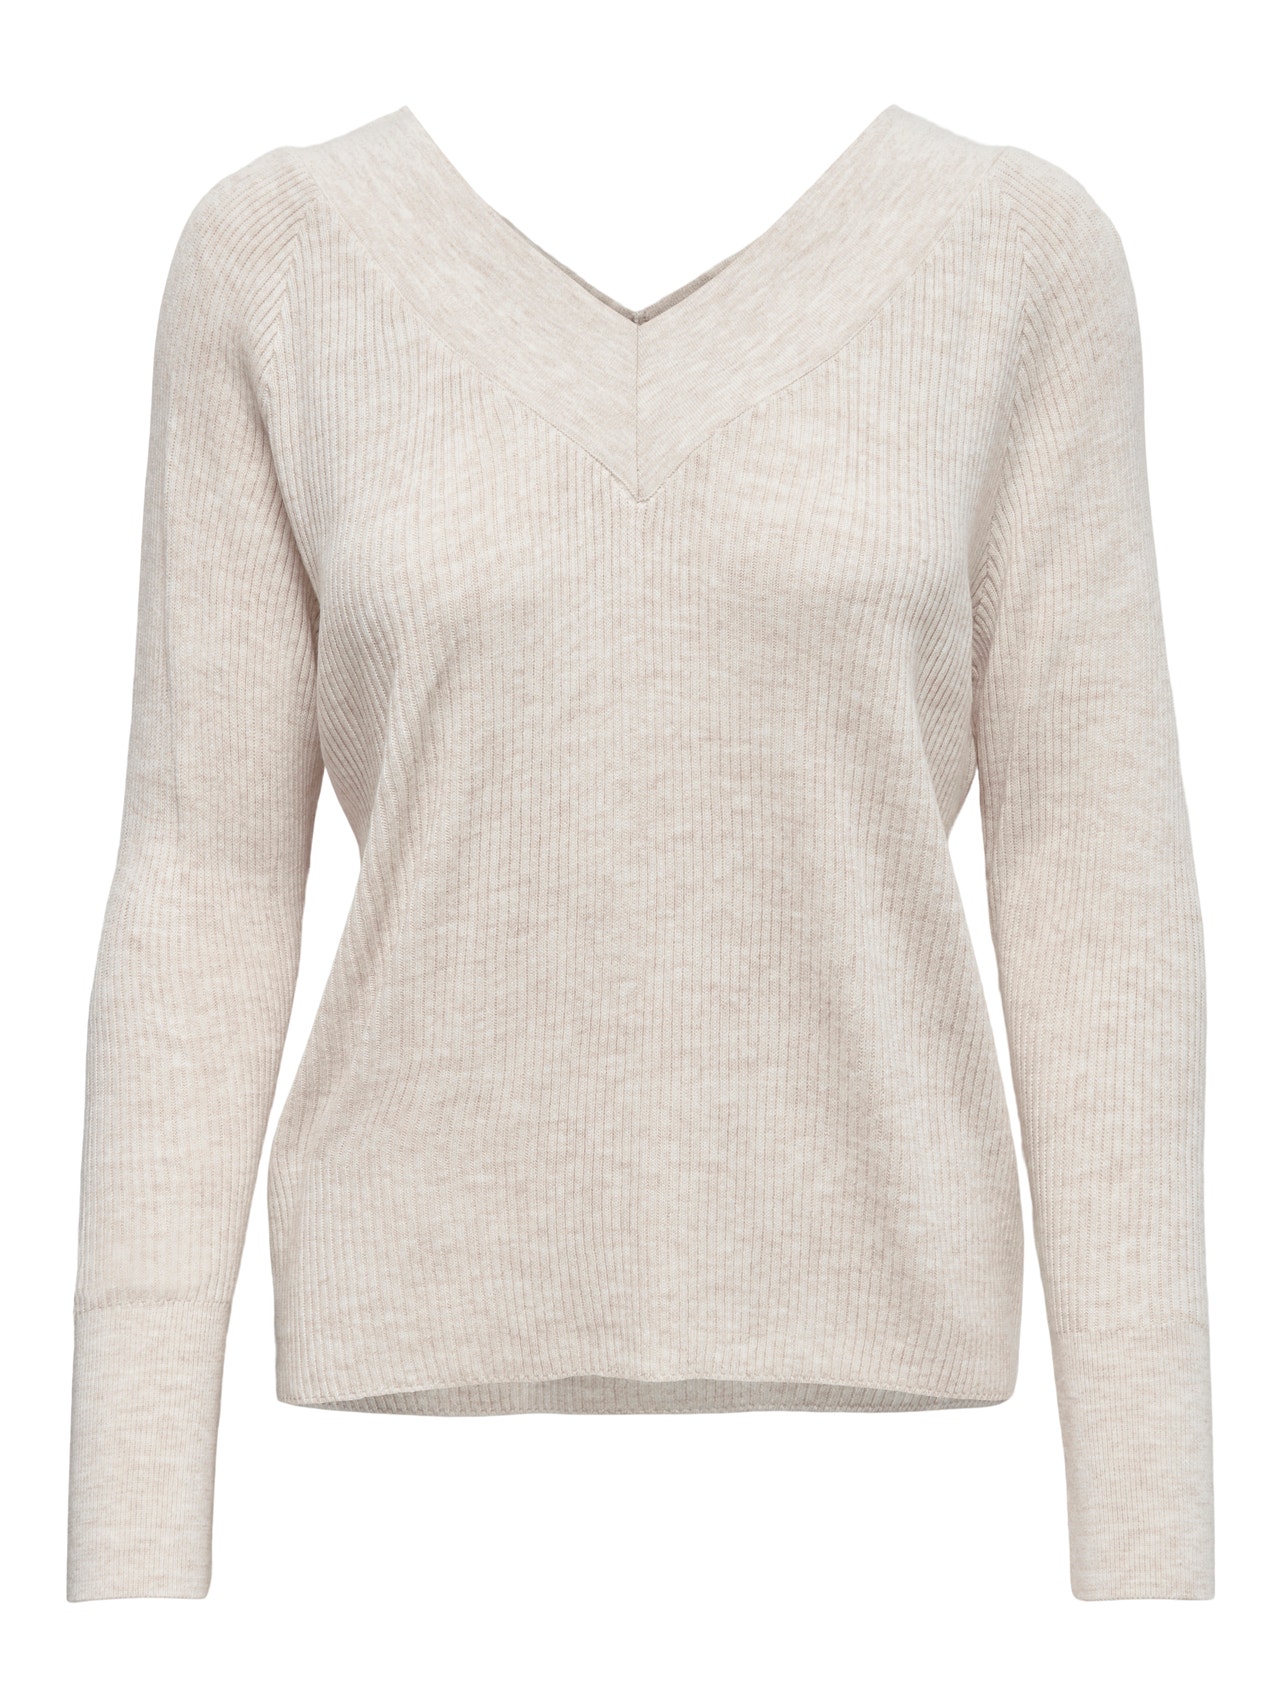 ONLY V-Neck Pullover -Pumice Stone - 15268801